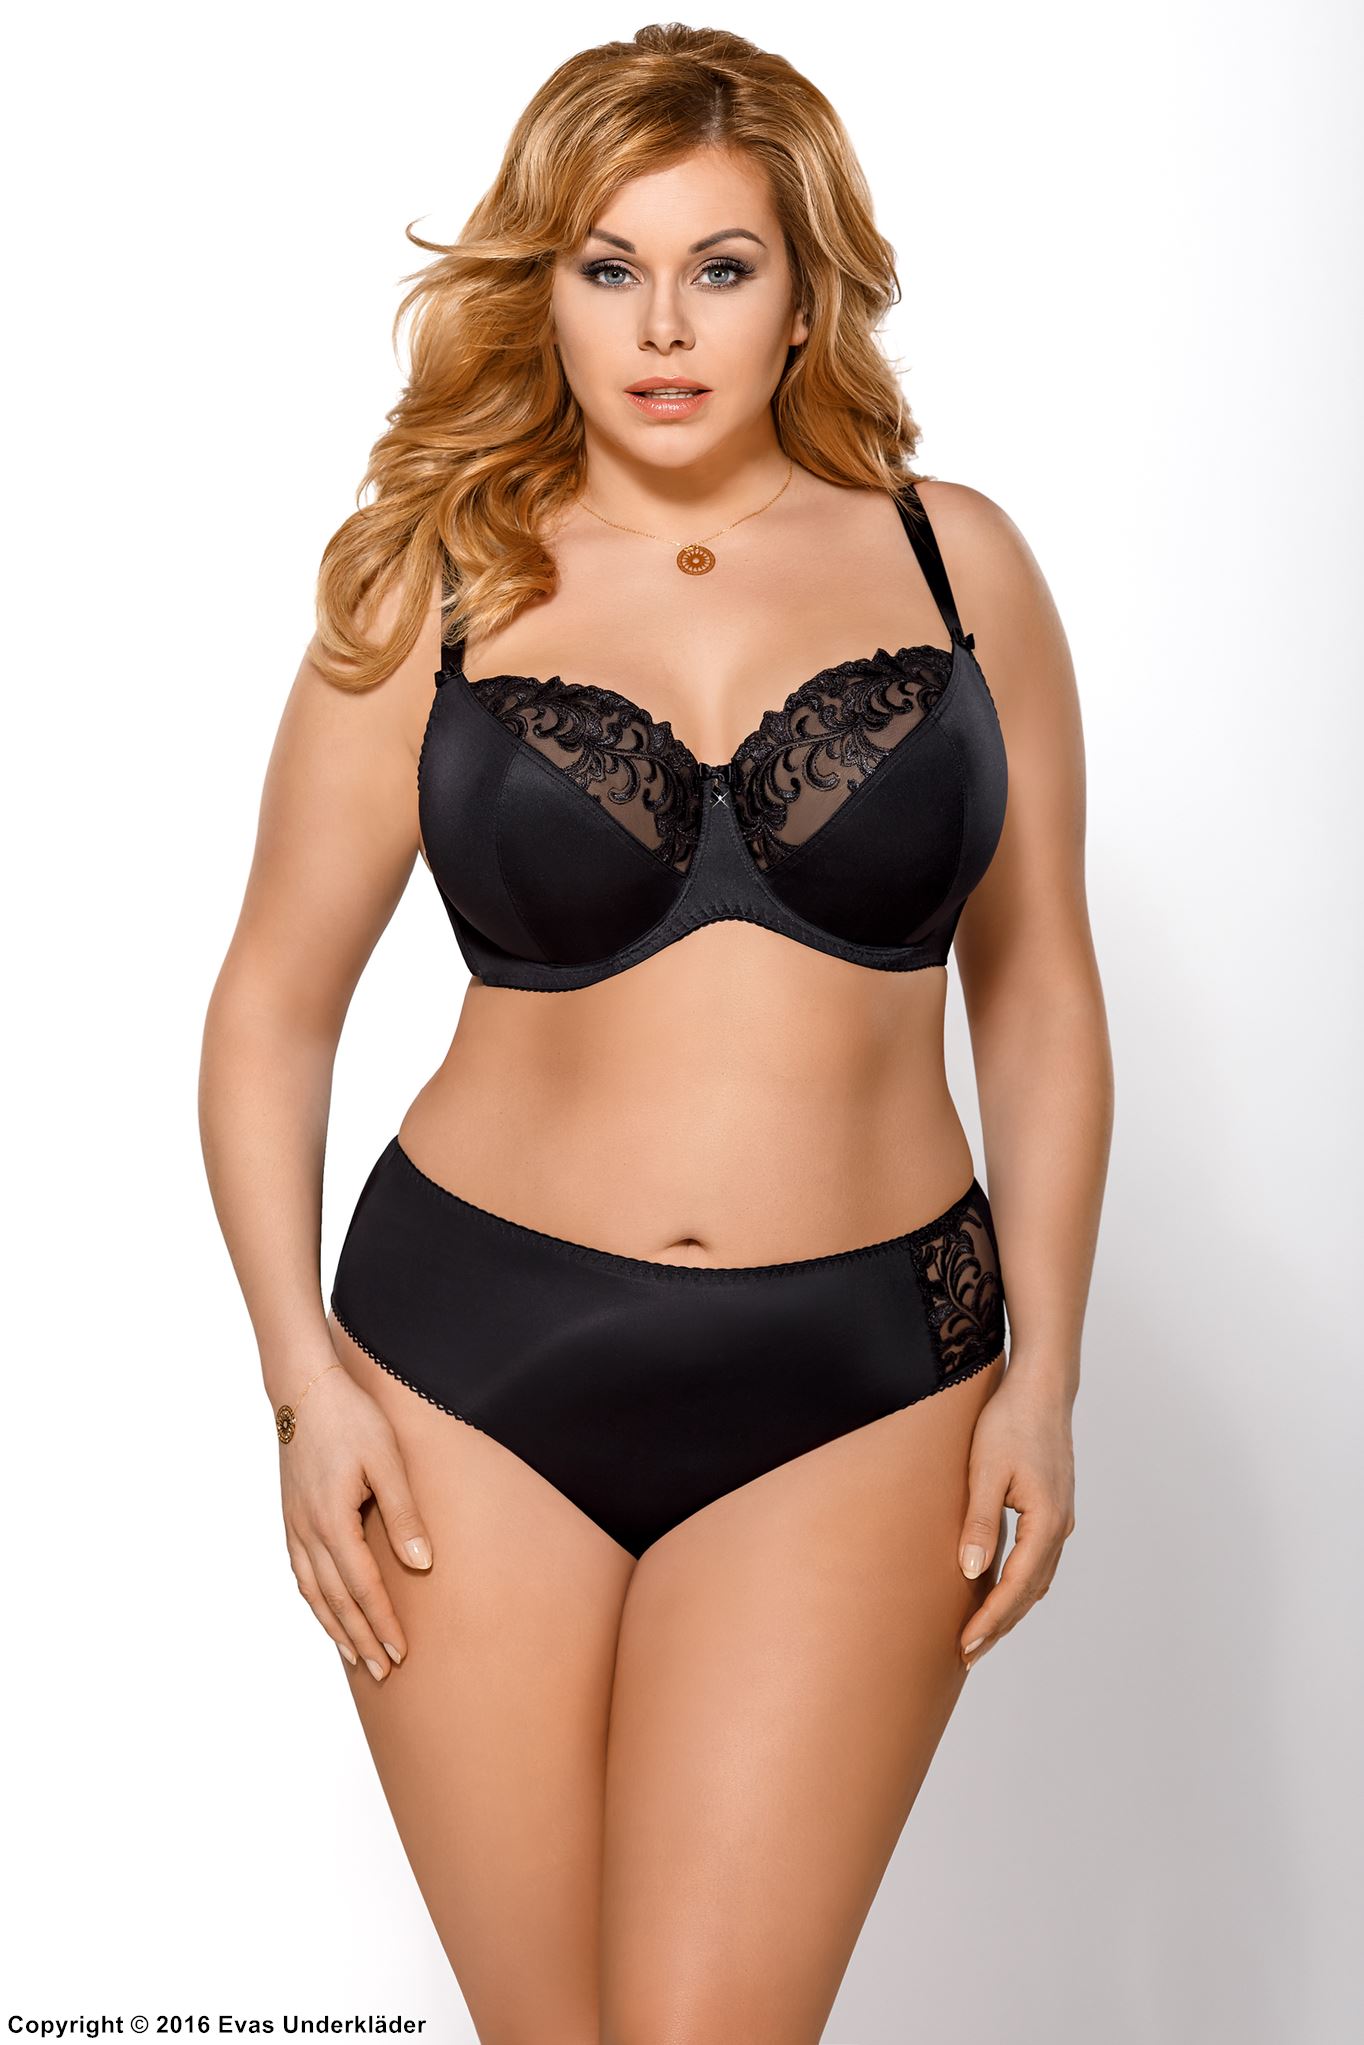 Classic briefs, sheer mesh, embroidery, plus size